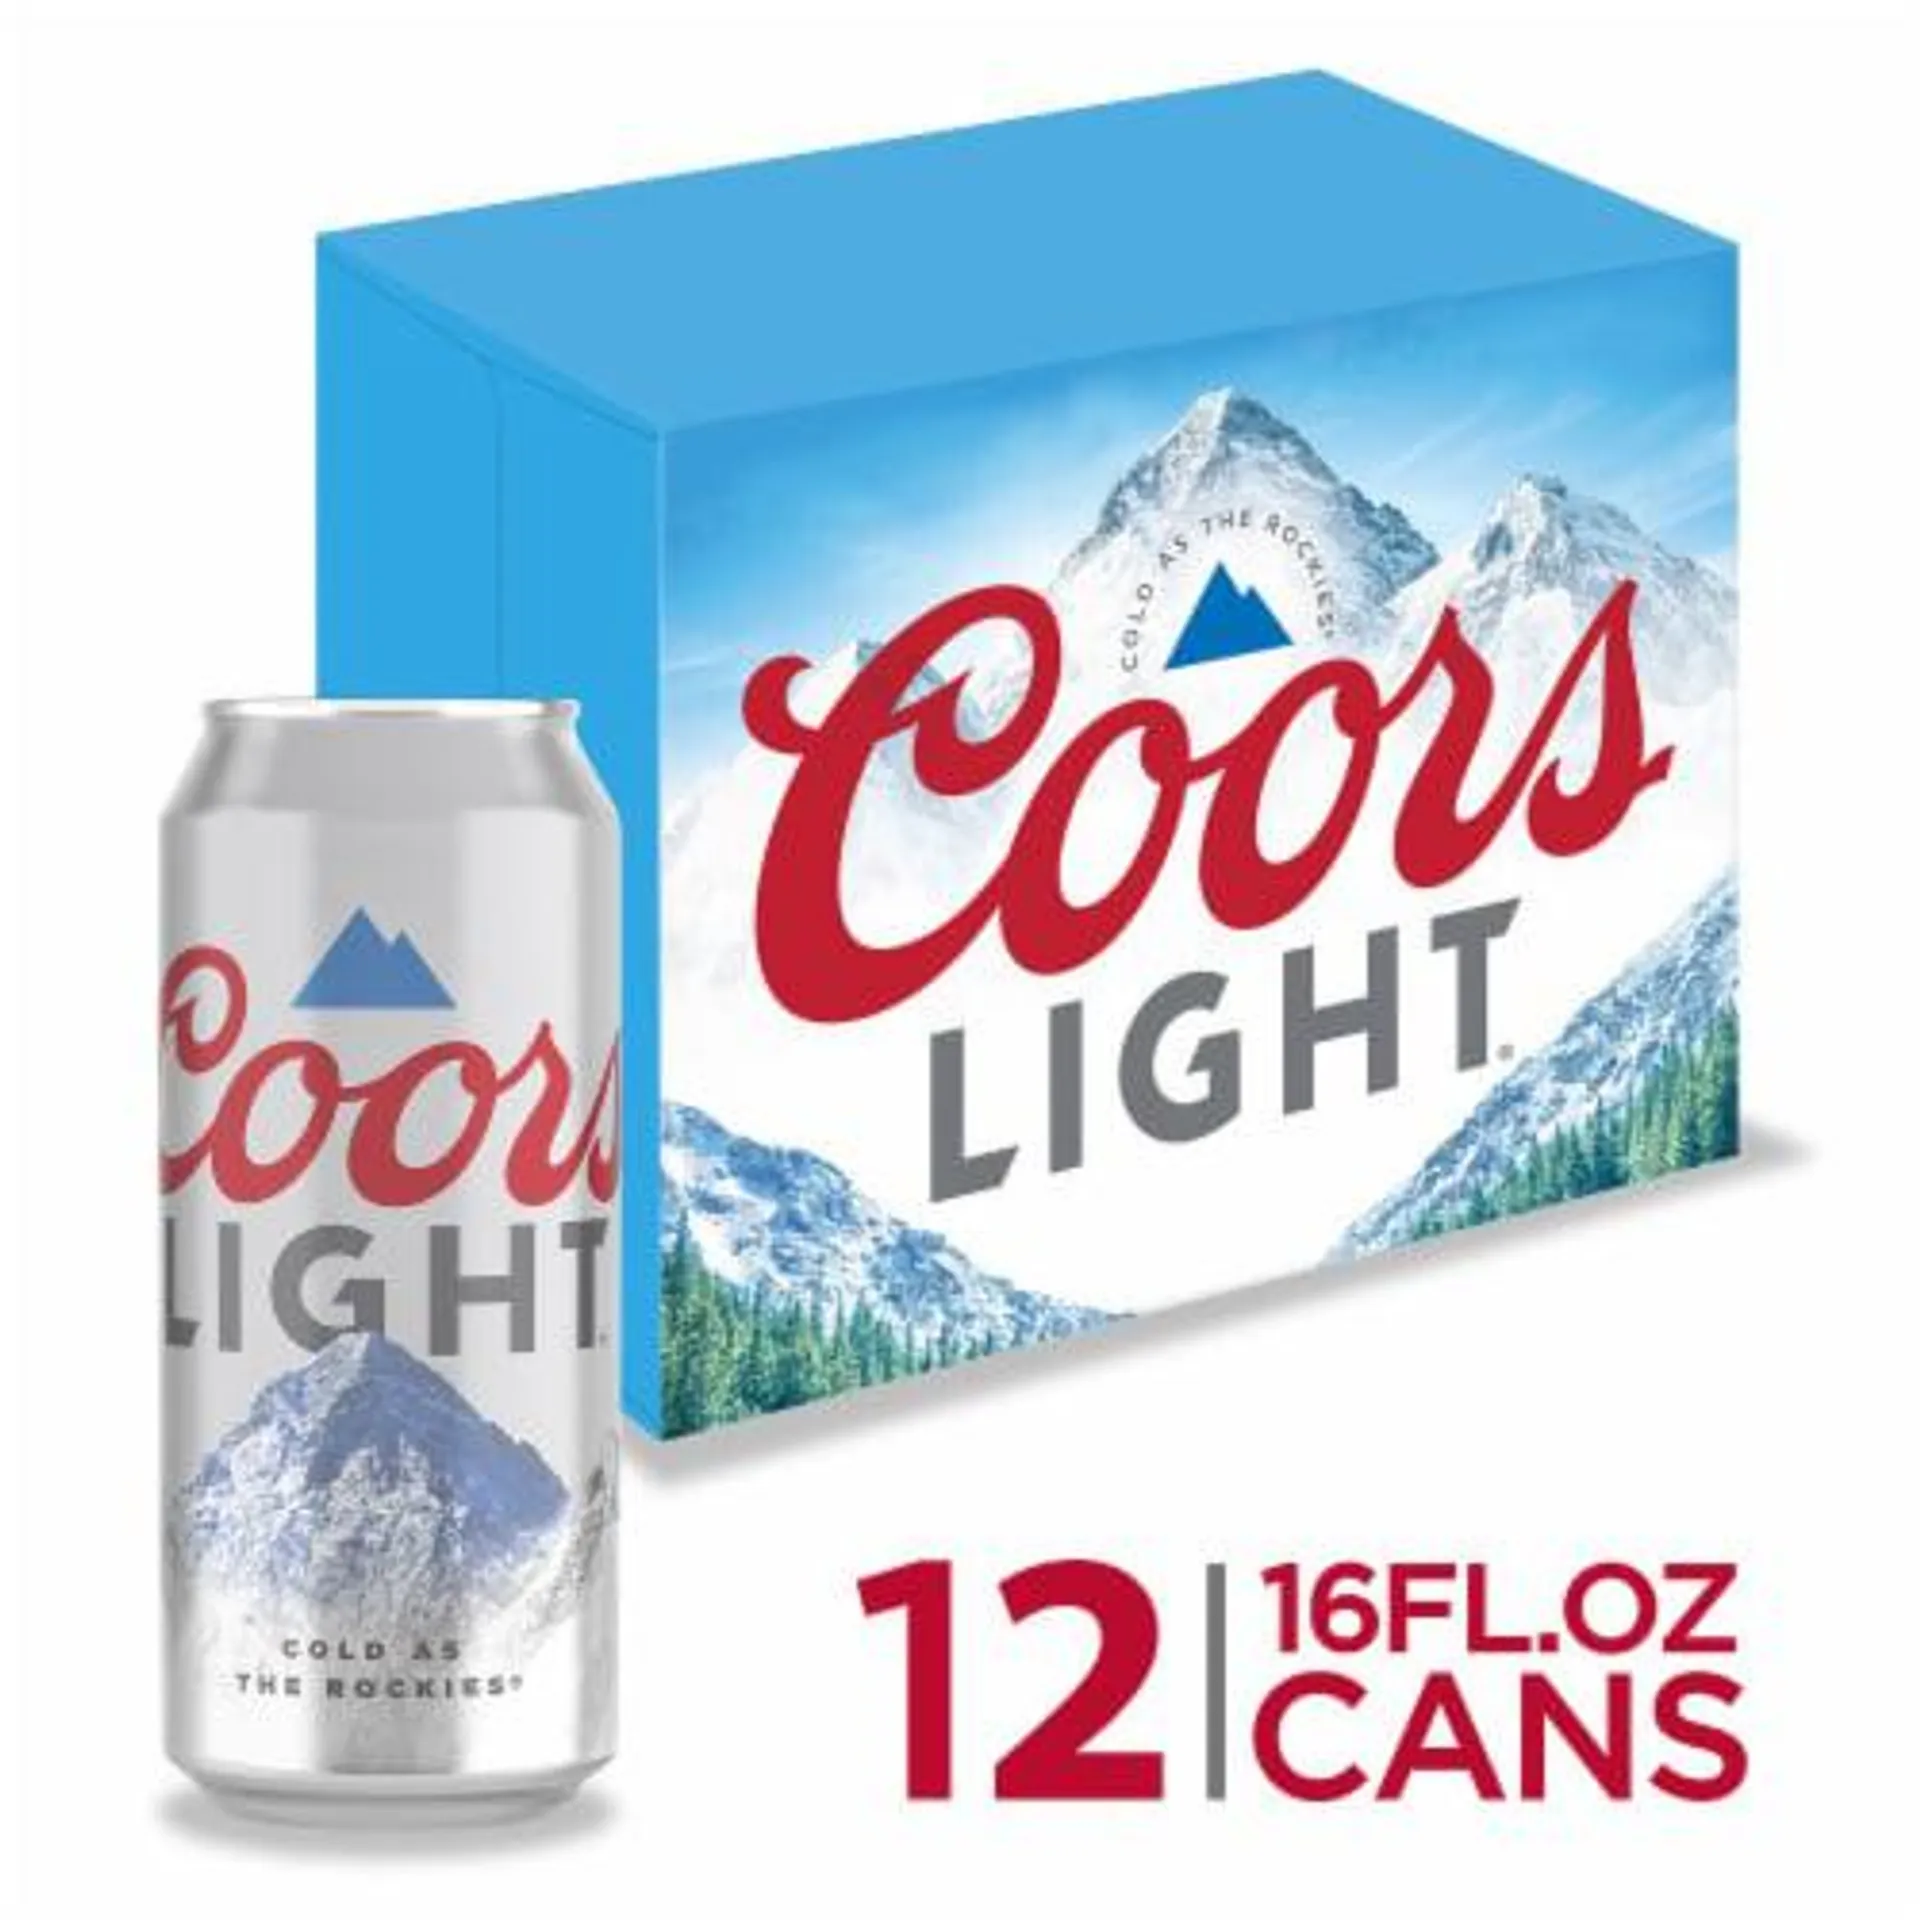 Coors Light American-style Light Lager Beer